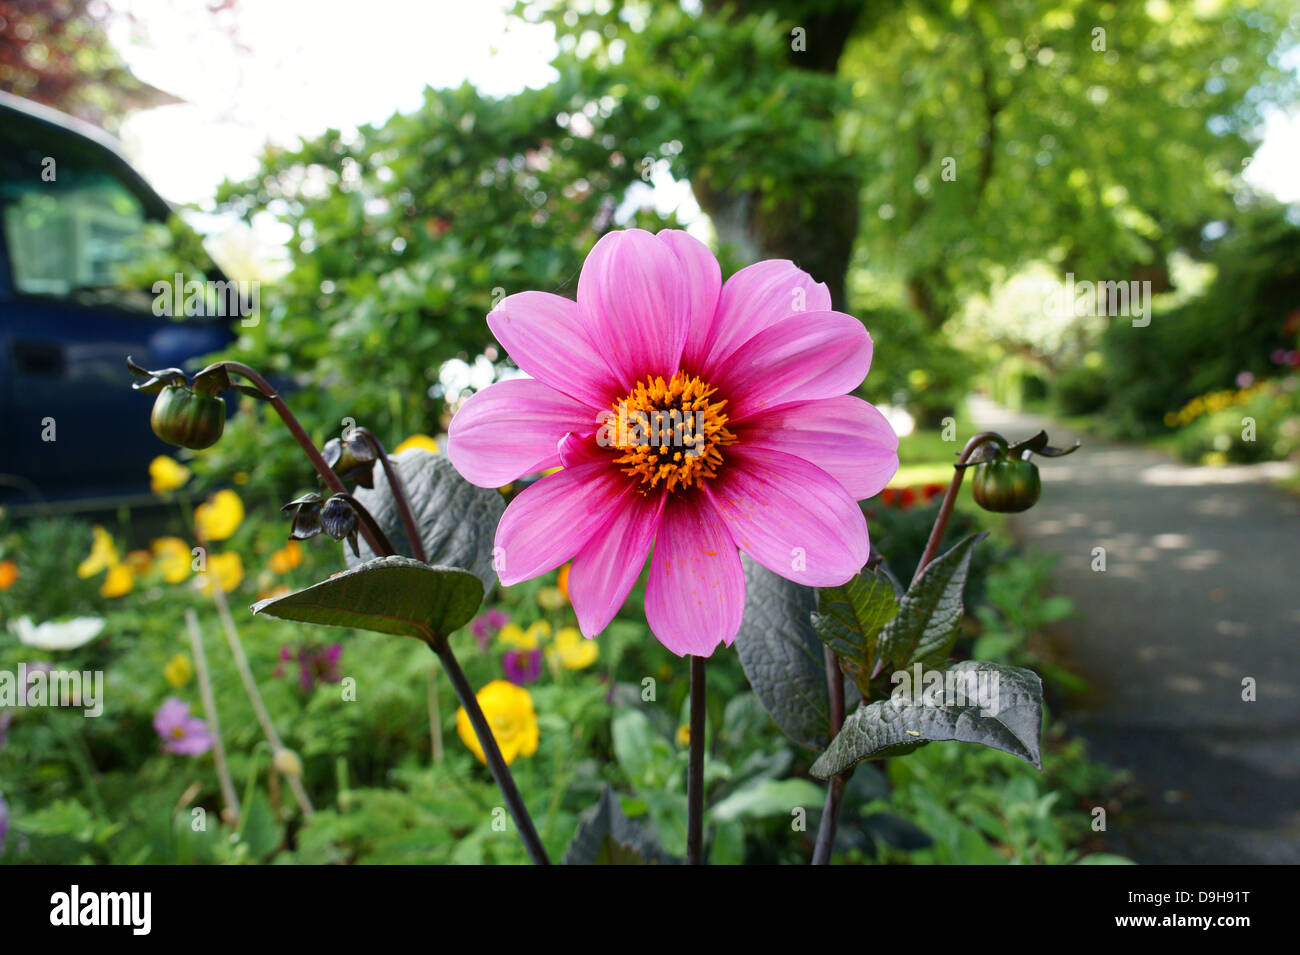 Summer pink daisy flower on a residential city street Stock Photo